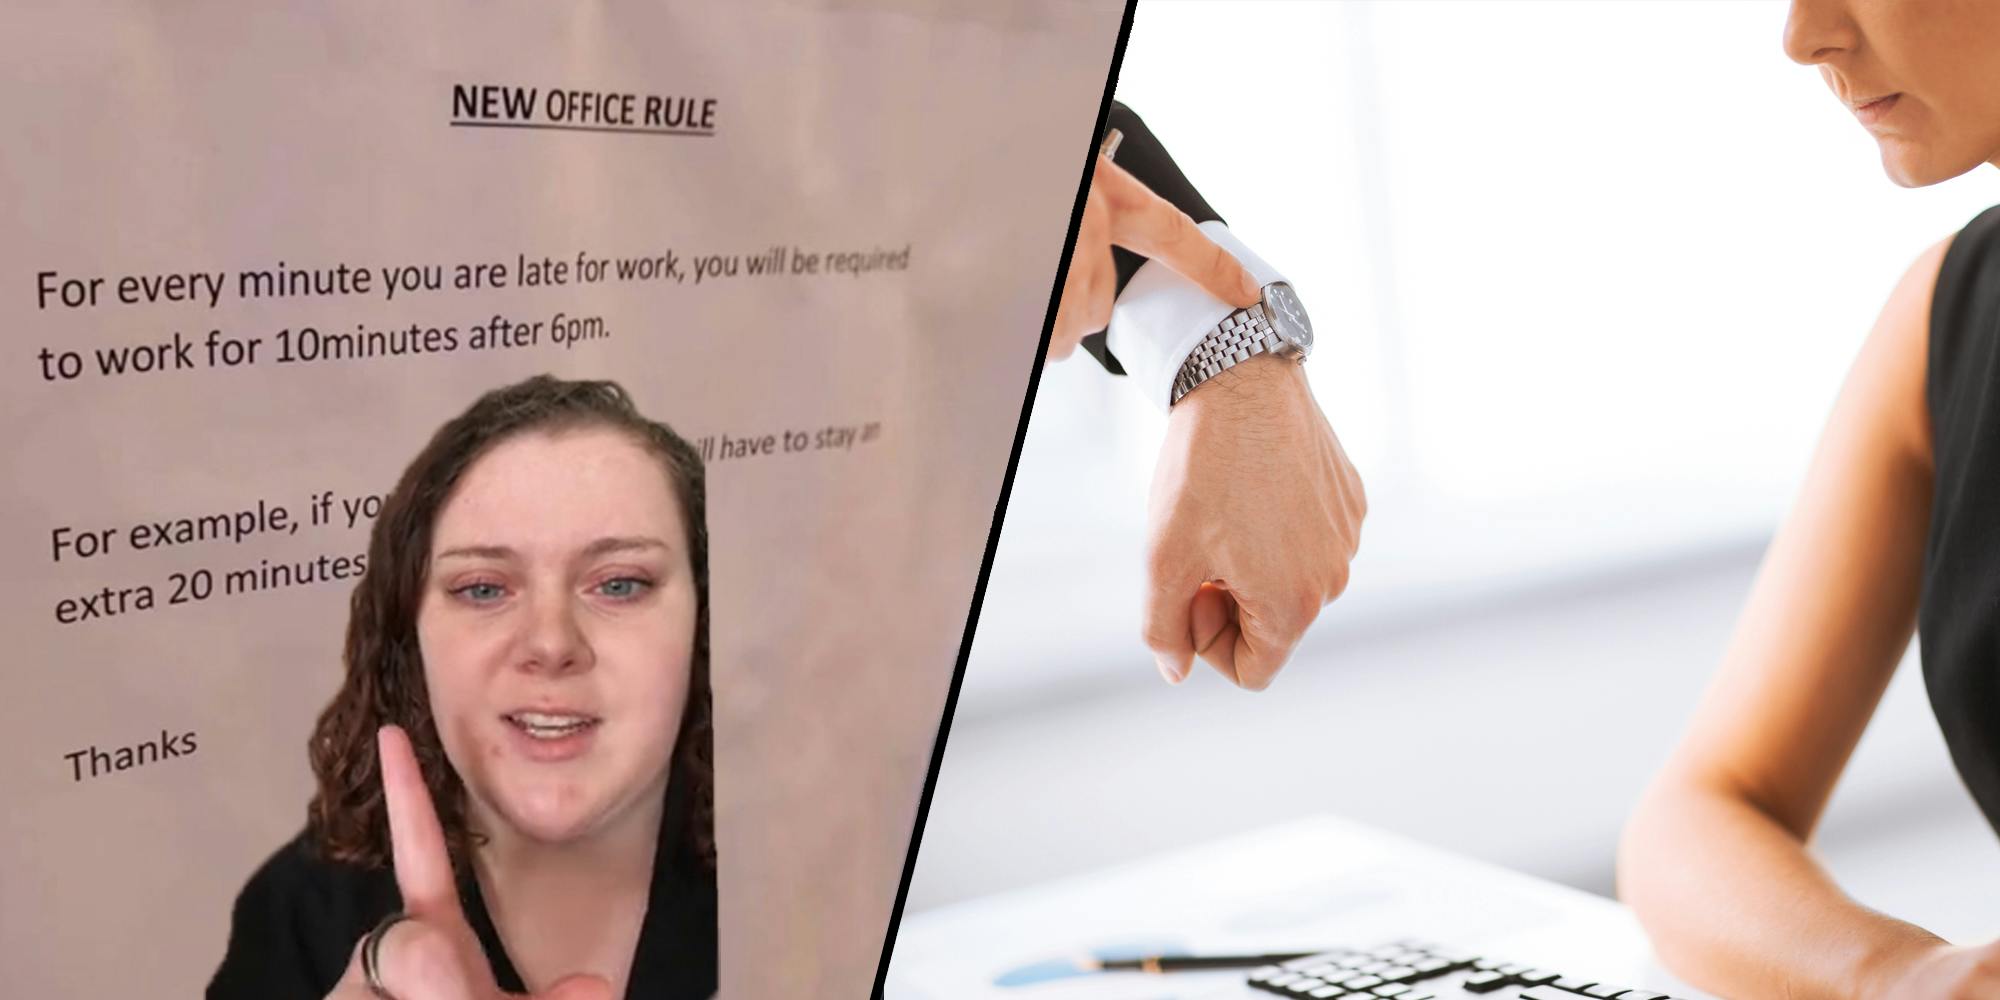 ‘We’ll see how long this lasts’: Company tries making workers stay 10 minutes past closing for every 1 minute they are late. It backfires